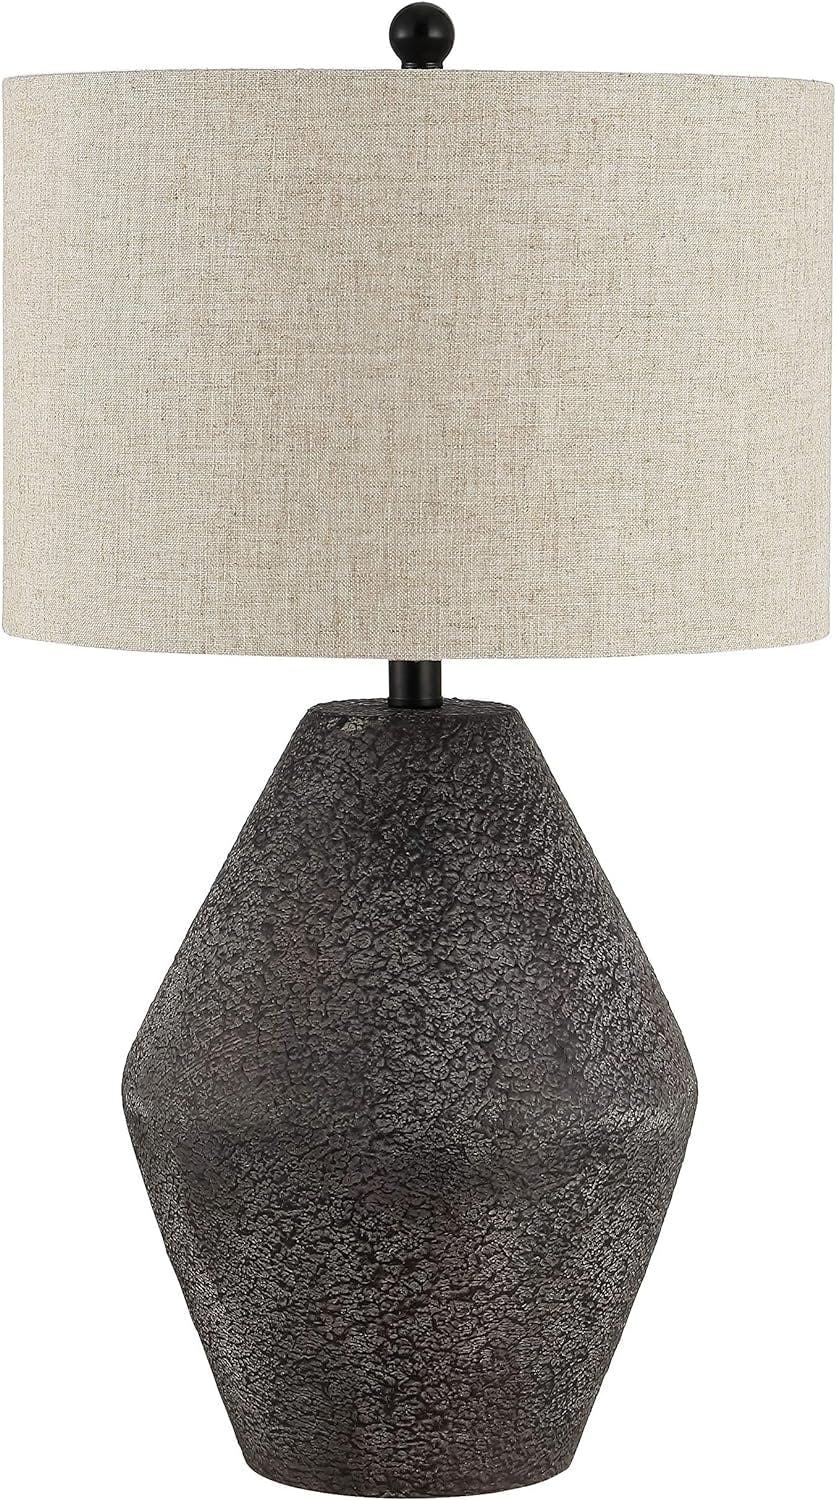 Ersta Angled Gourd Silhouette Table Lamp in Earthy Brown with Oatmeal Shade